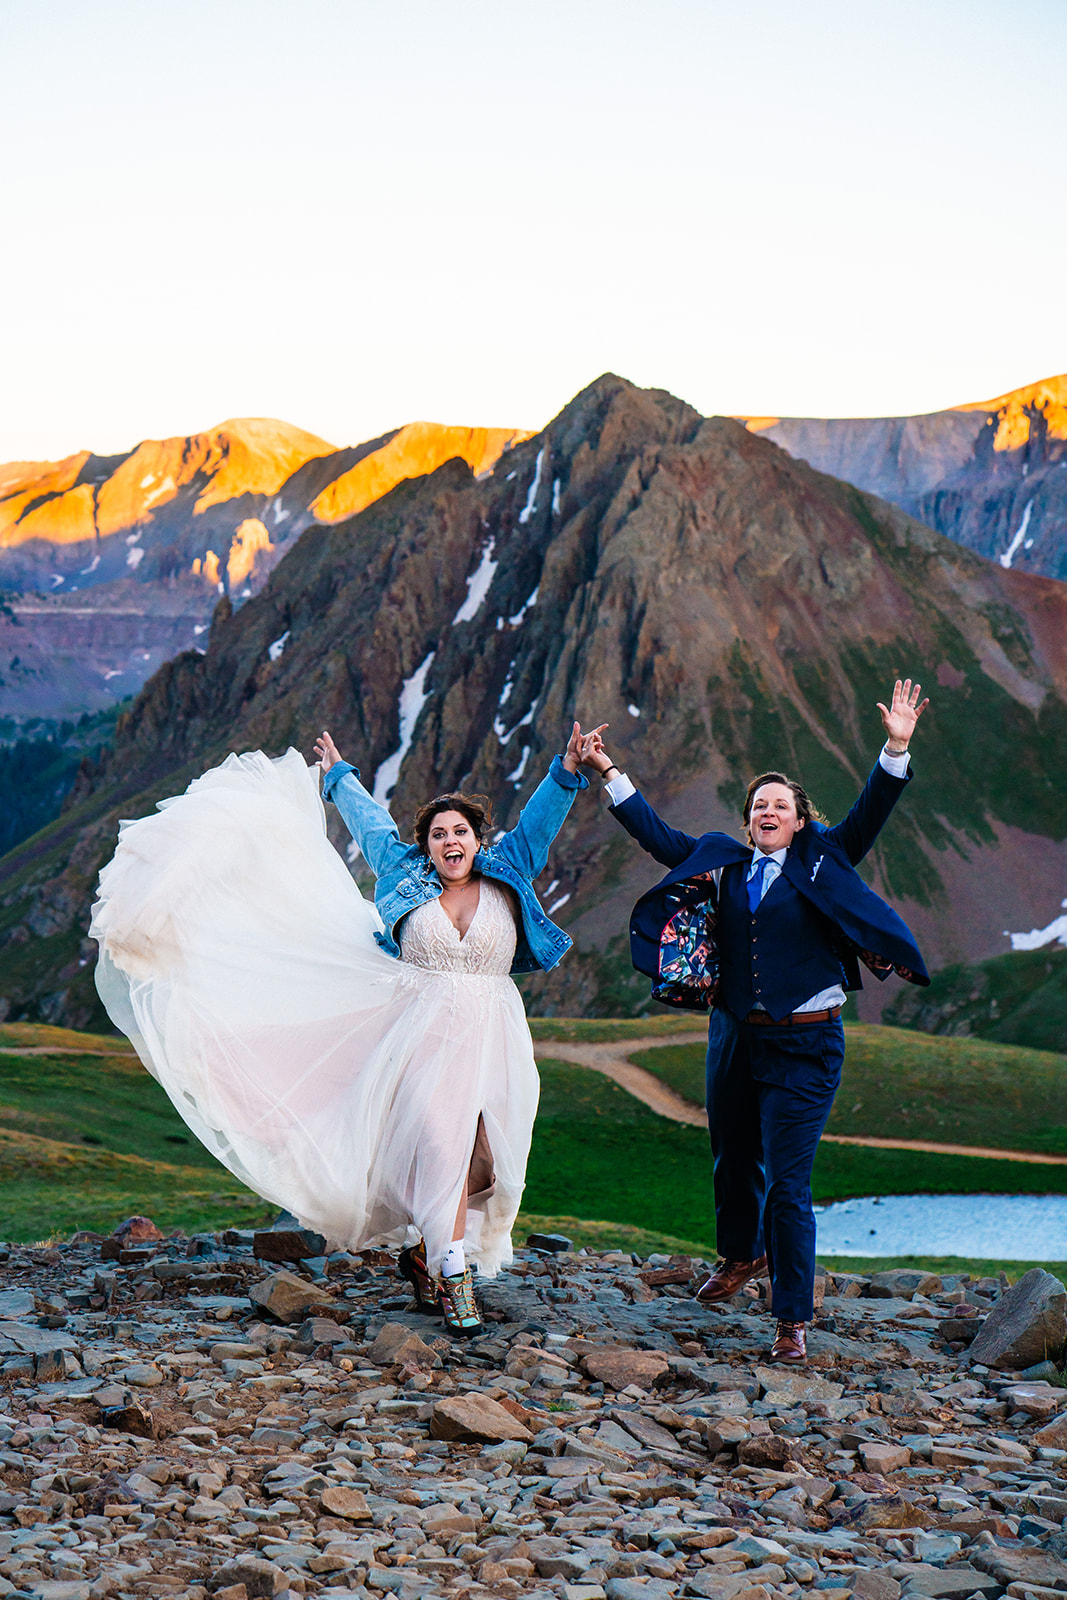 Lesbian couple cheering during sunset in Ouray Colorado